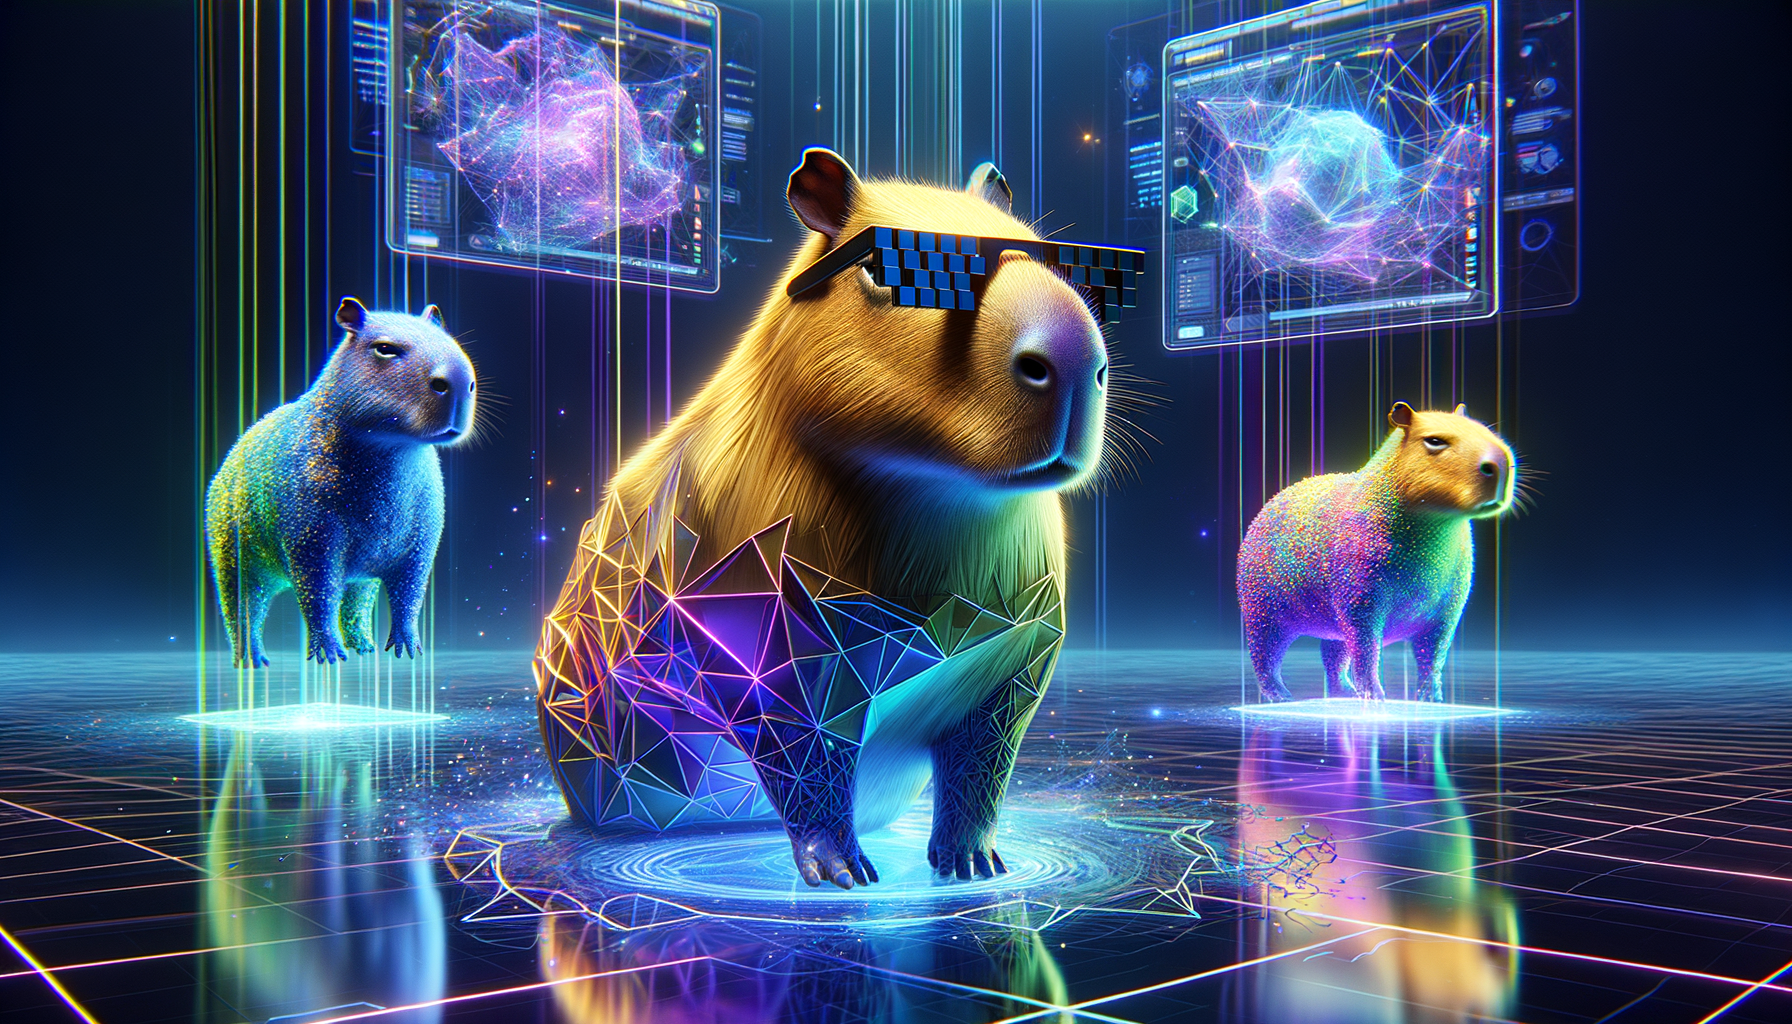 Our capybara mascot being beamed from an AI universe in multiple copies, one of them being the definite form of capybara awesomeness.